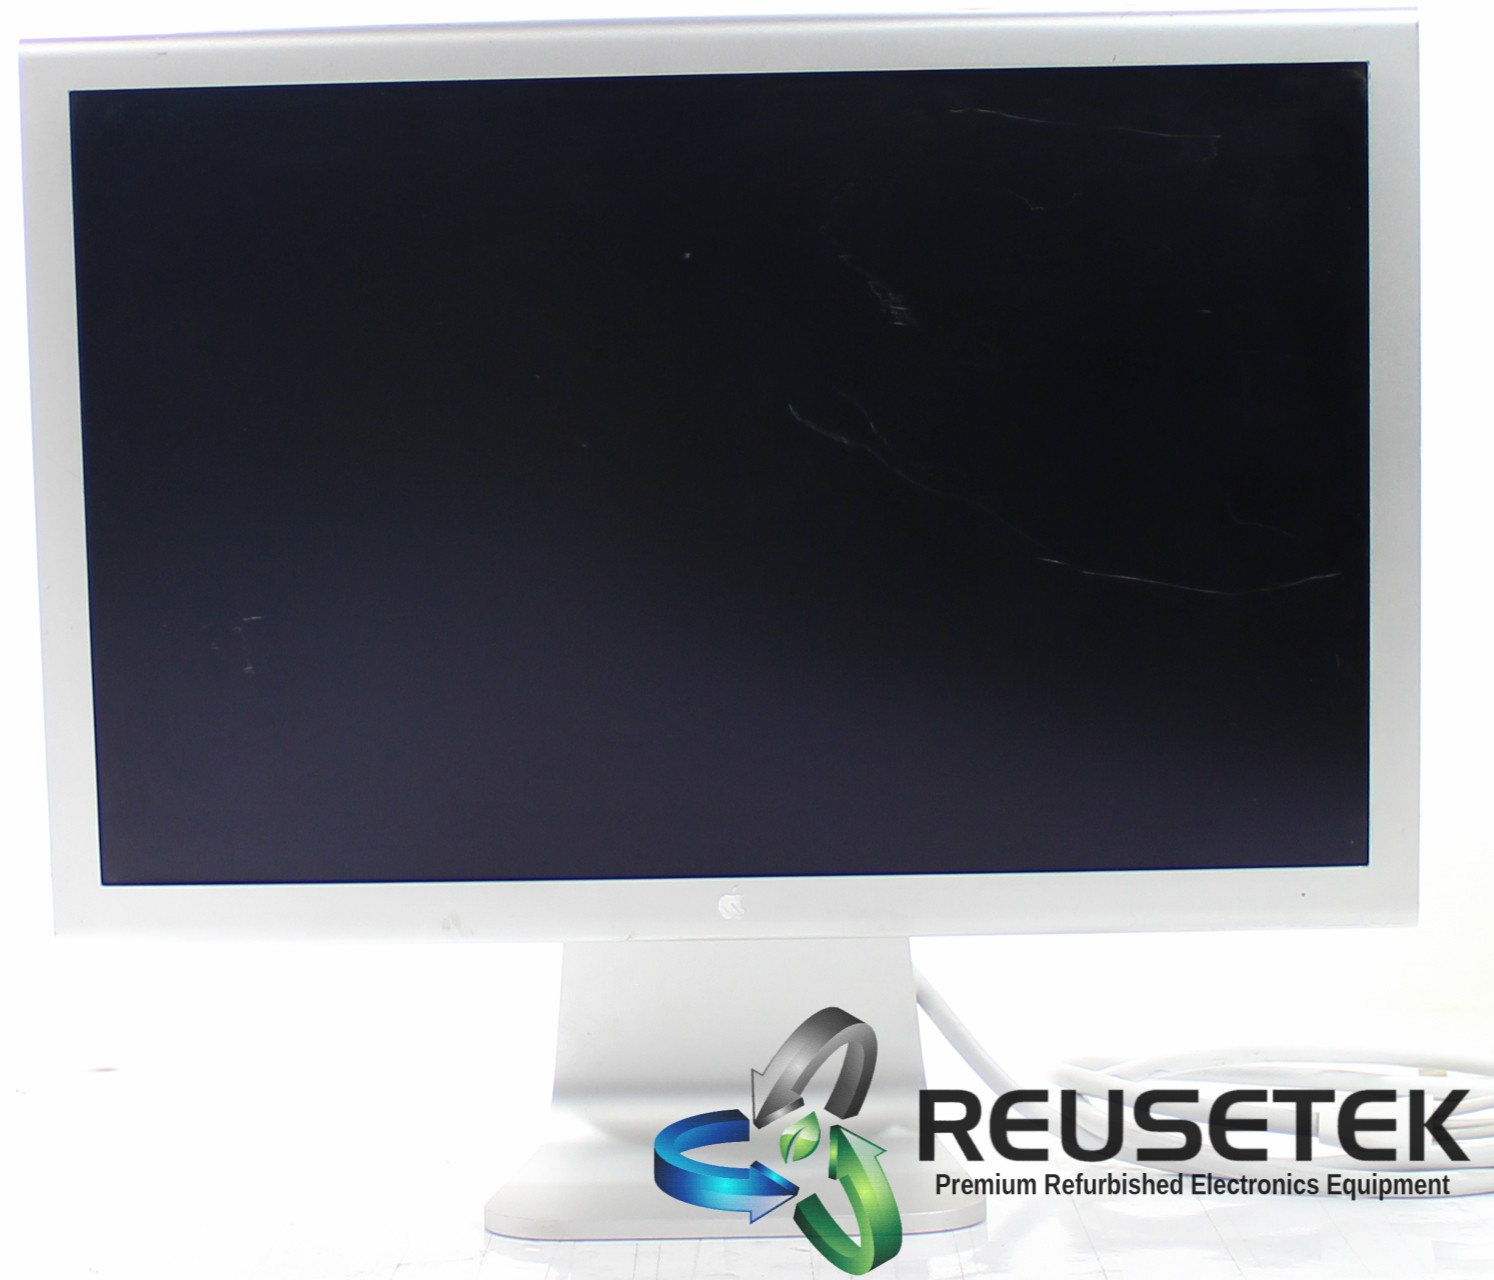 500030919-SN11988238-Apple A1081 20" Widescreen LCD Monitor-image